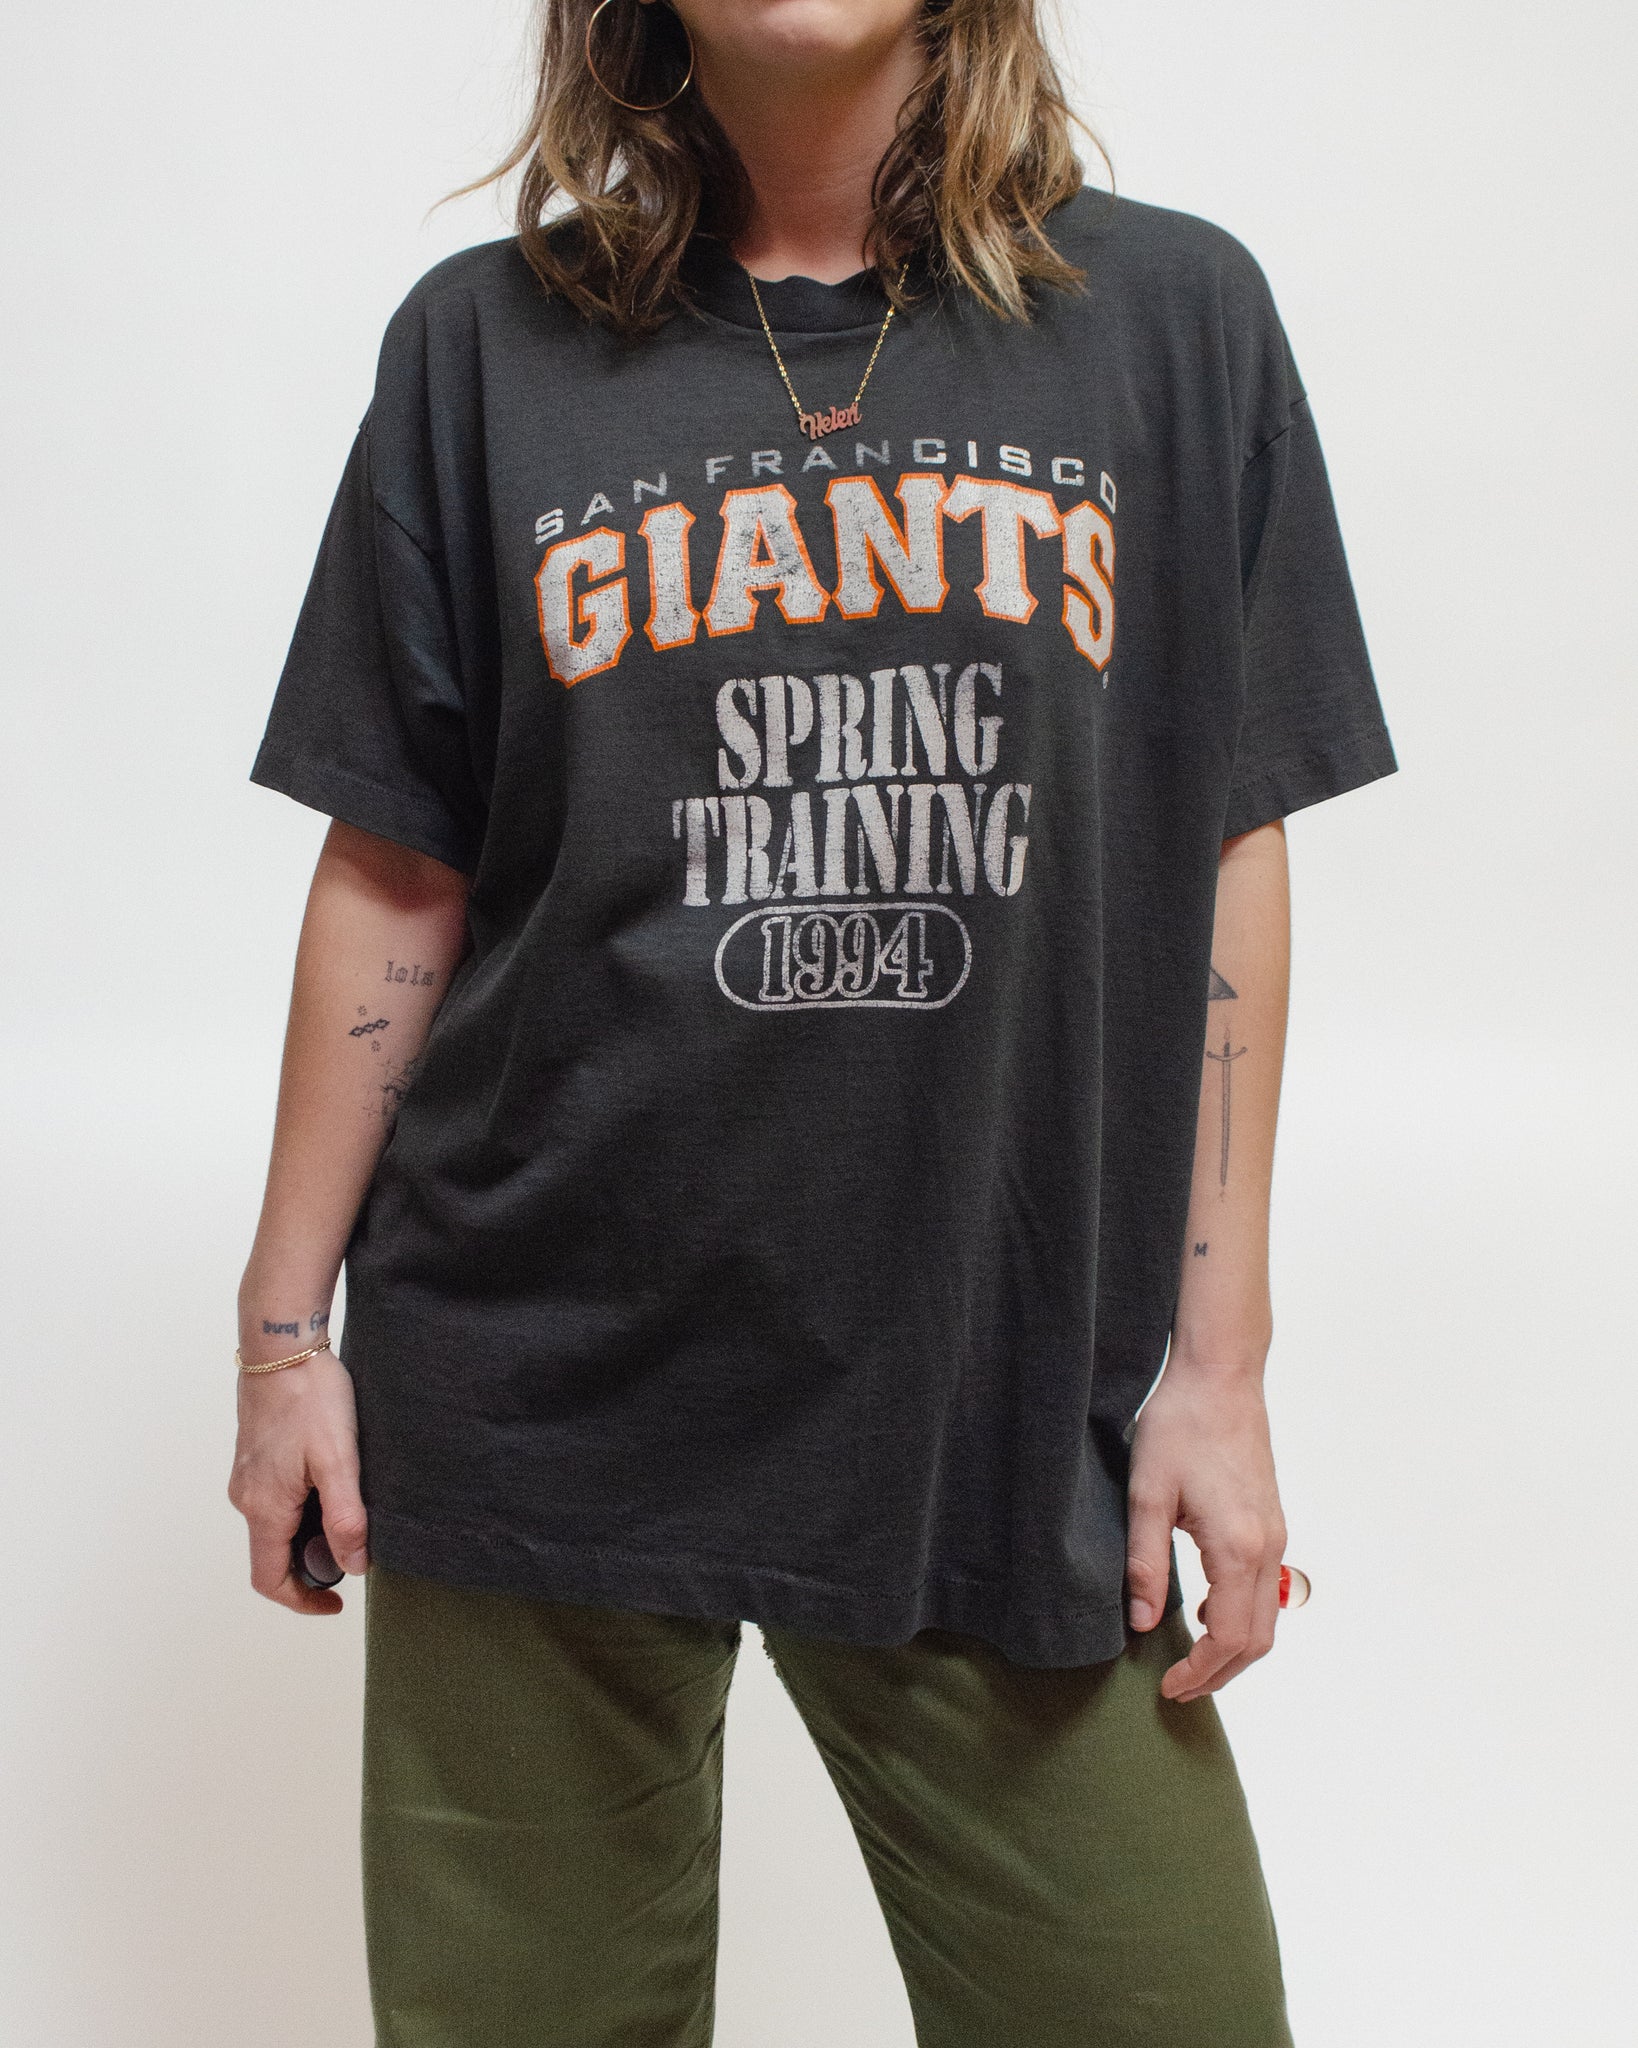 SF Giants spring training '94 t-shirt – OURstore Vintage